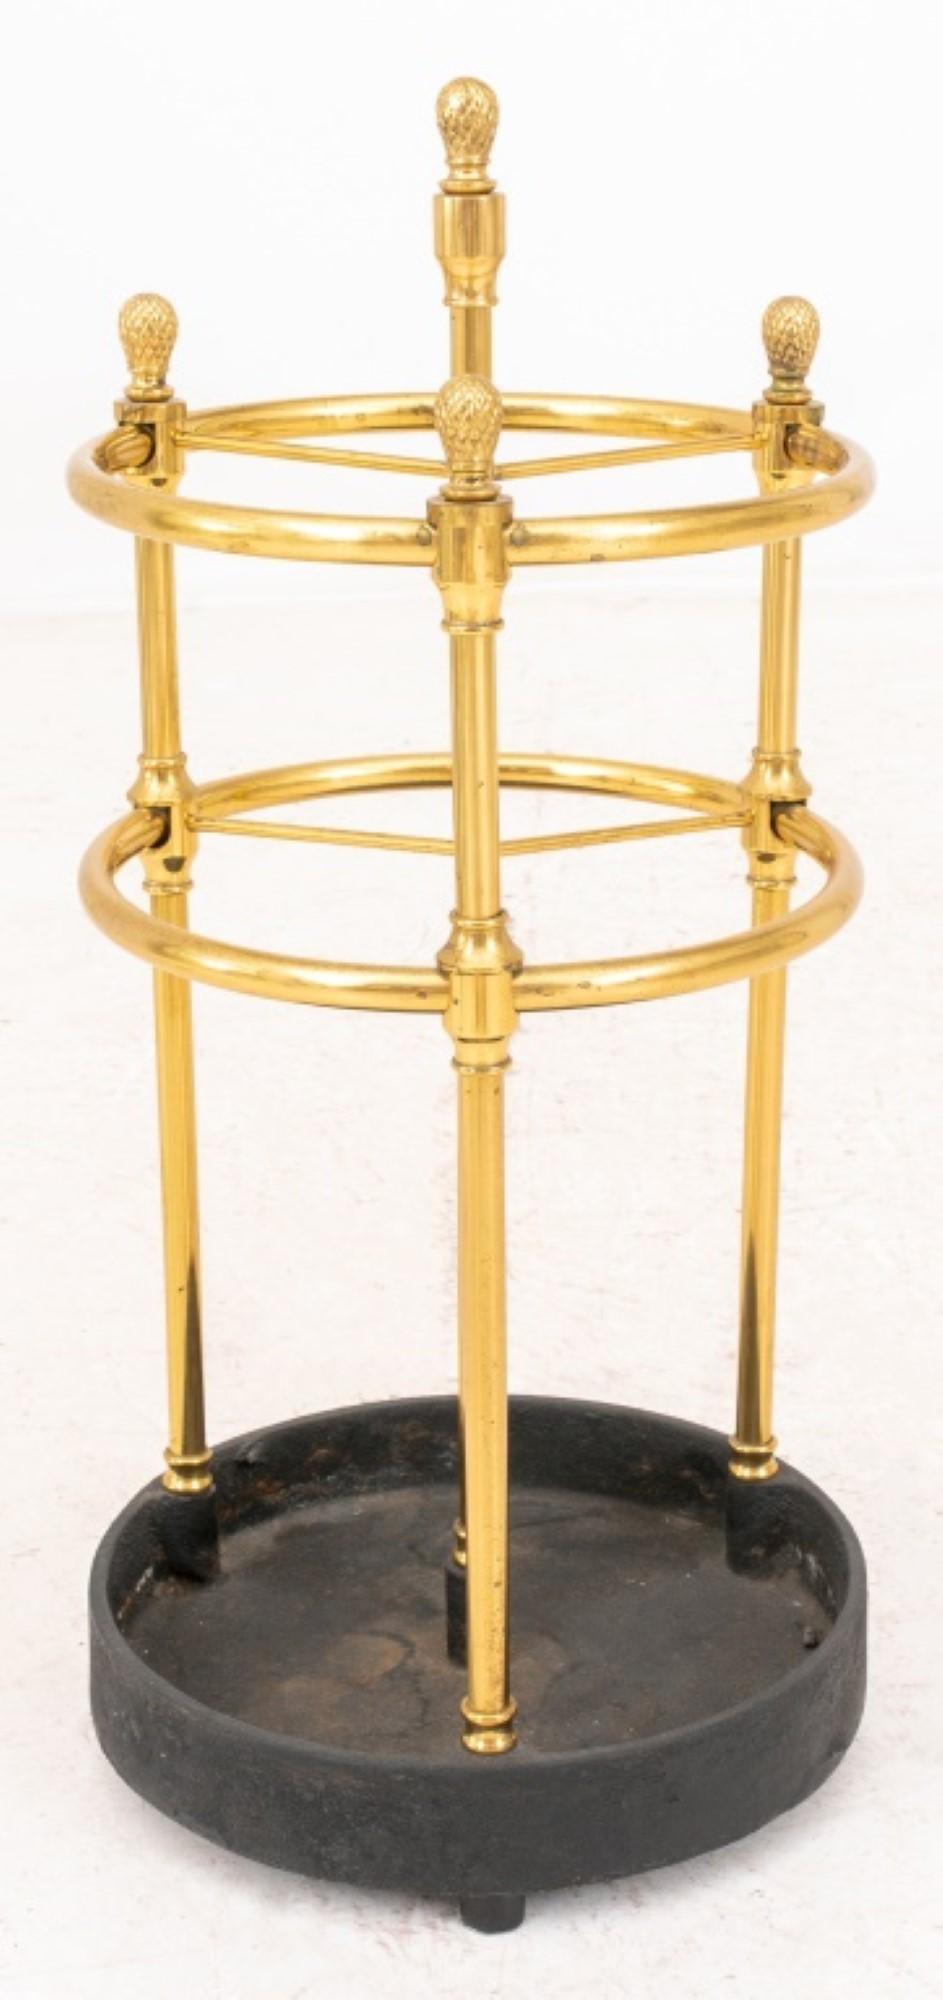 The Neoclassical brass umbrella stand or cane rack has approximate

 Dimensions of 25.5 inches in height and a diameter of 12 inches.
